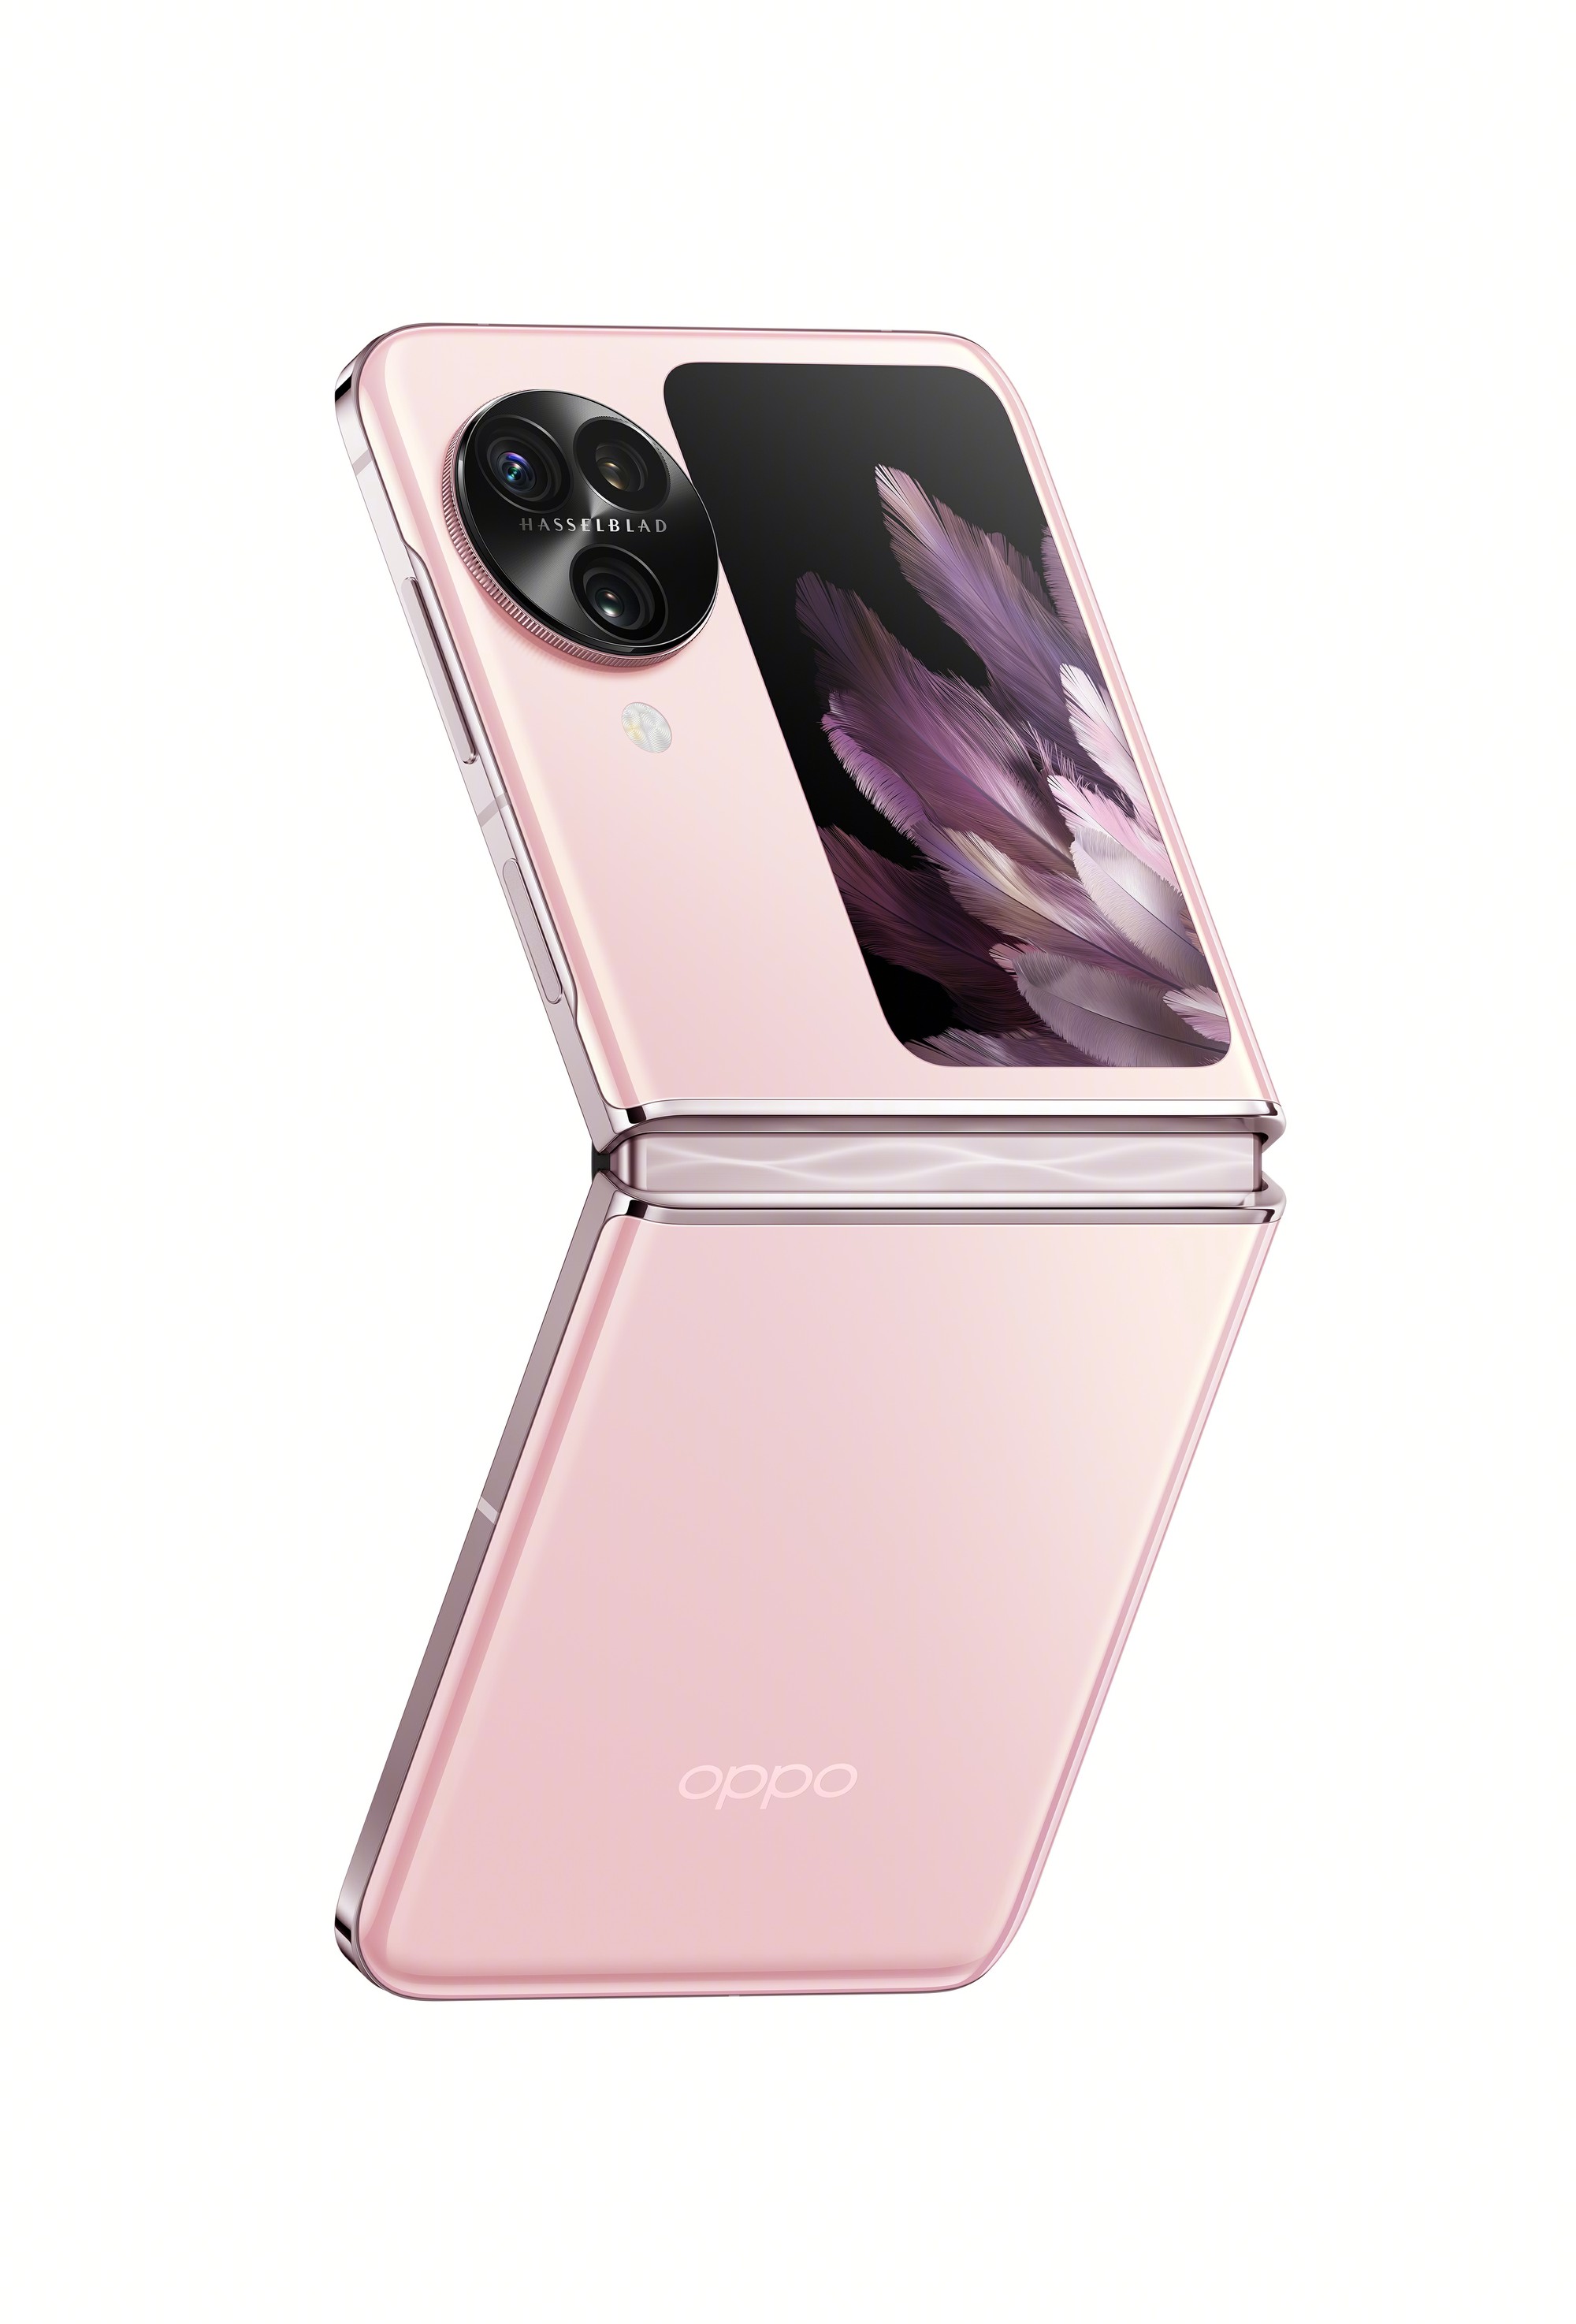 OPPO Find N3 and Find N3 Flip Smartphones Launch Globally